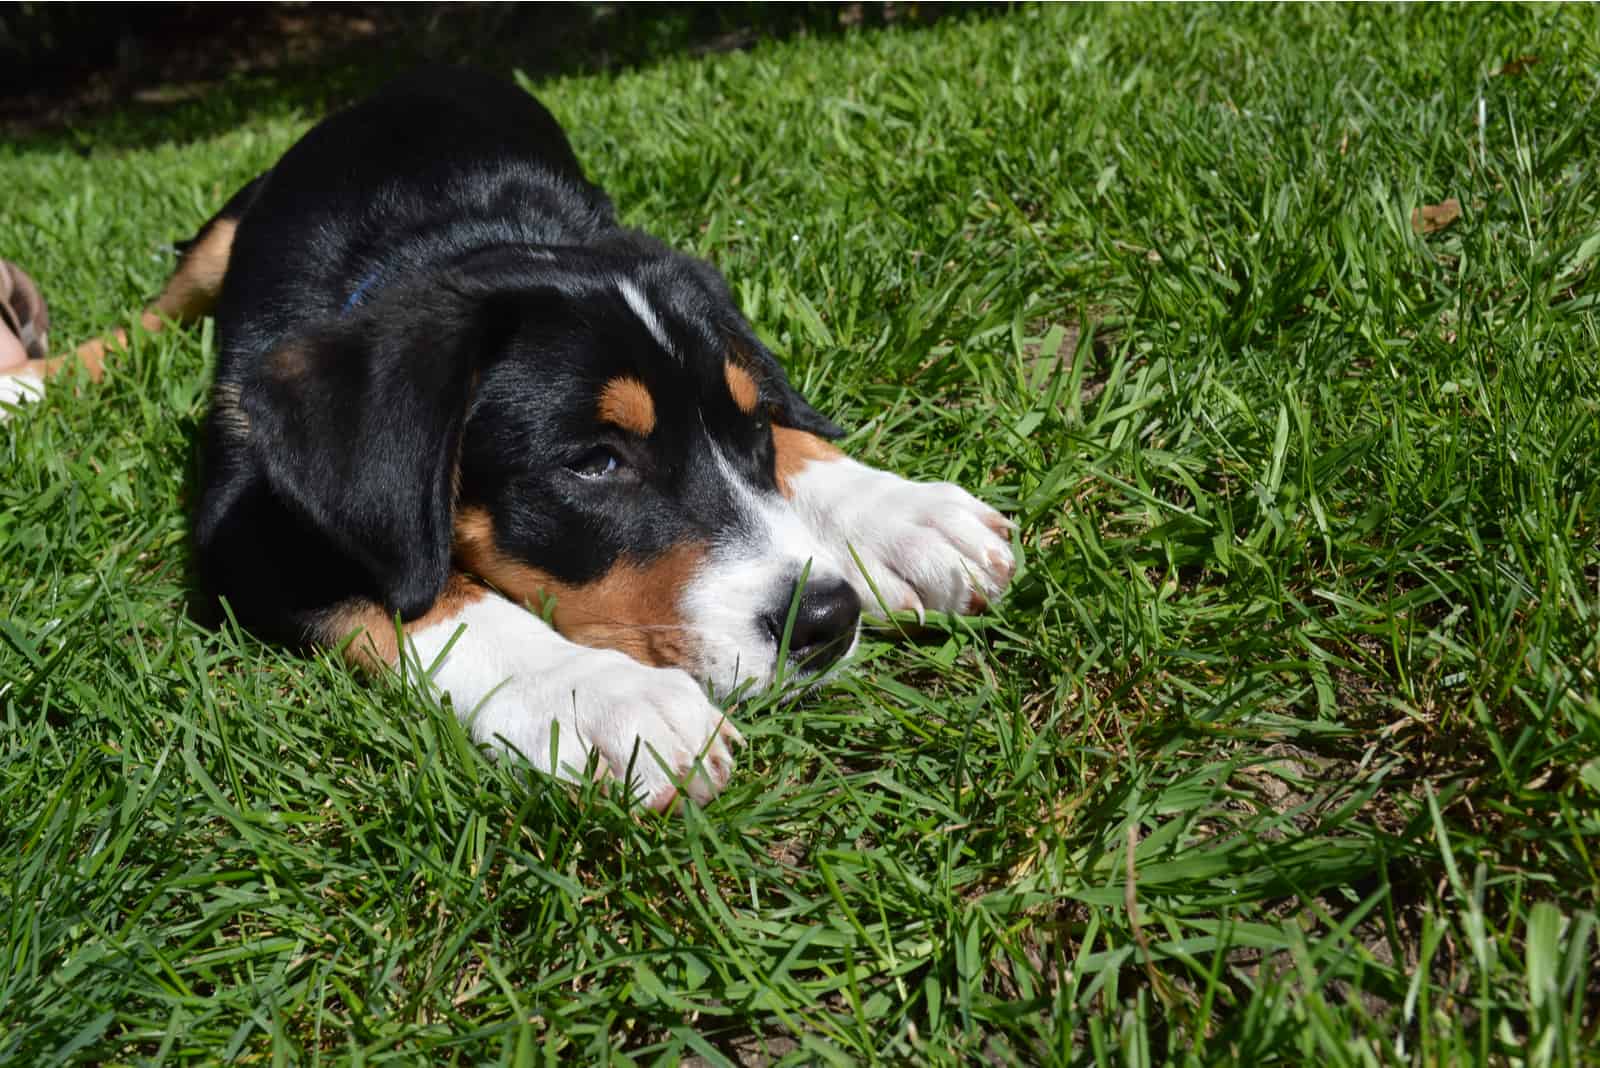 greater swiss mountain dog laying on the grass